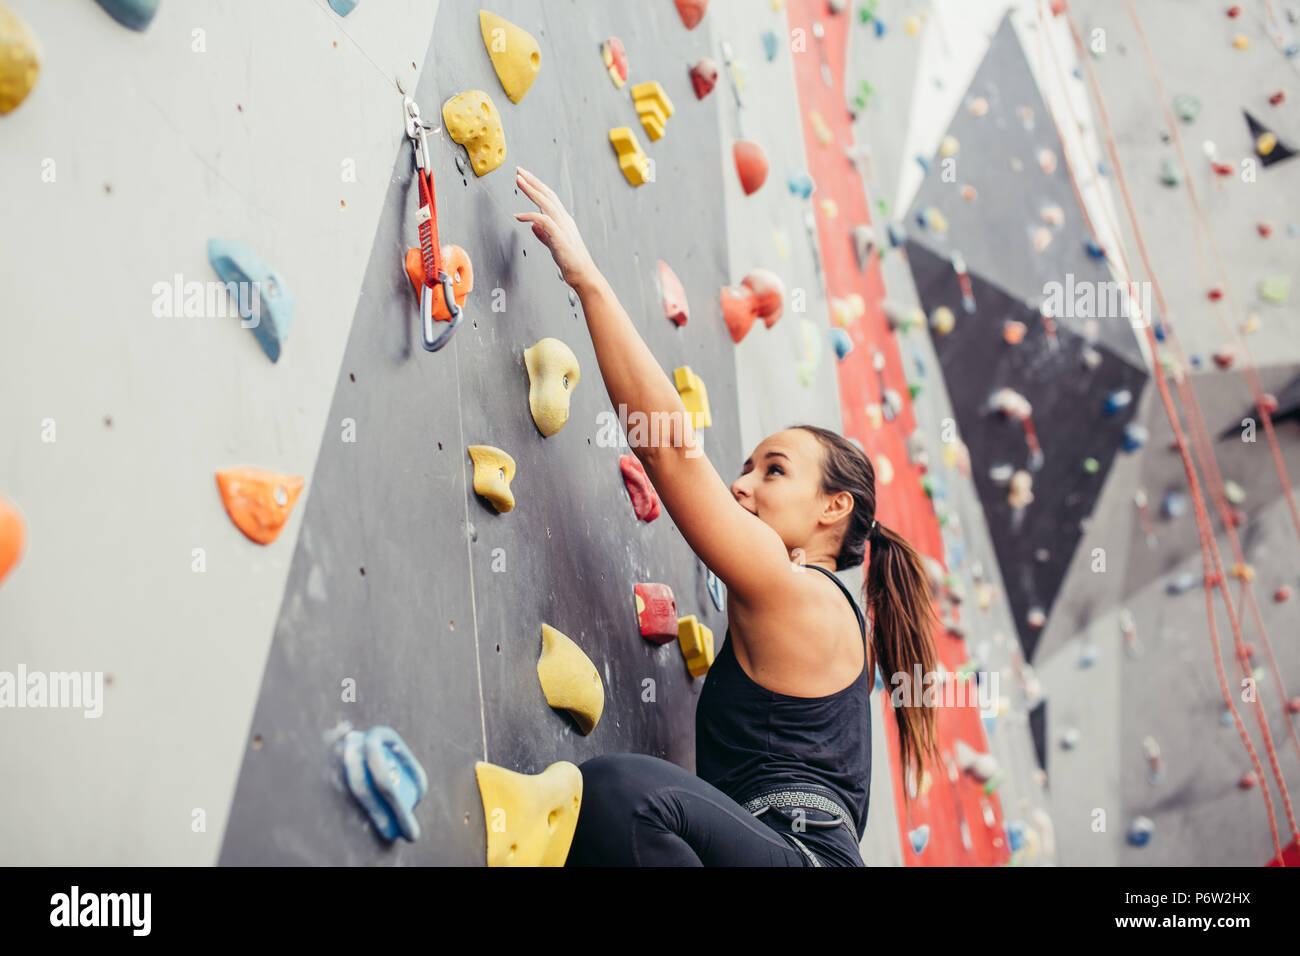 Sporty couple of climbers dressed in a rock climbing outfit training at the  bouldering gym Stock Photo - Alamy